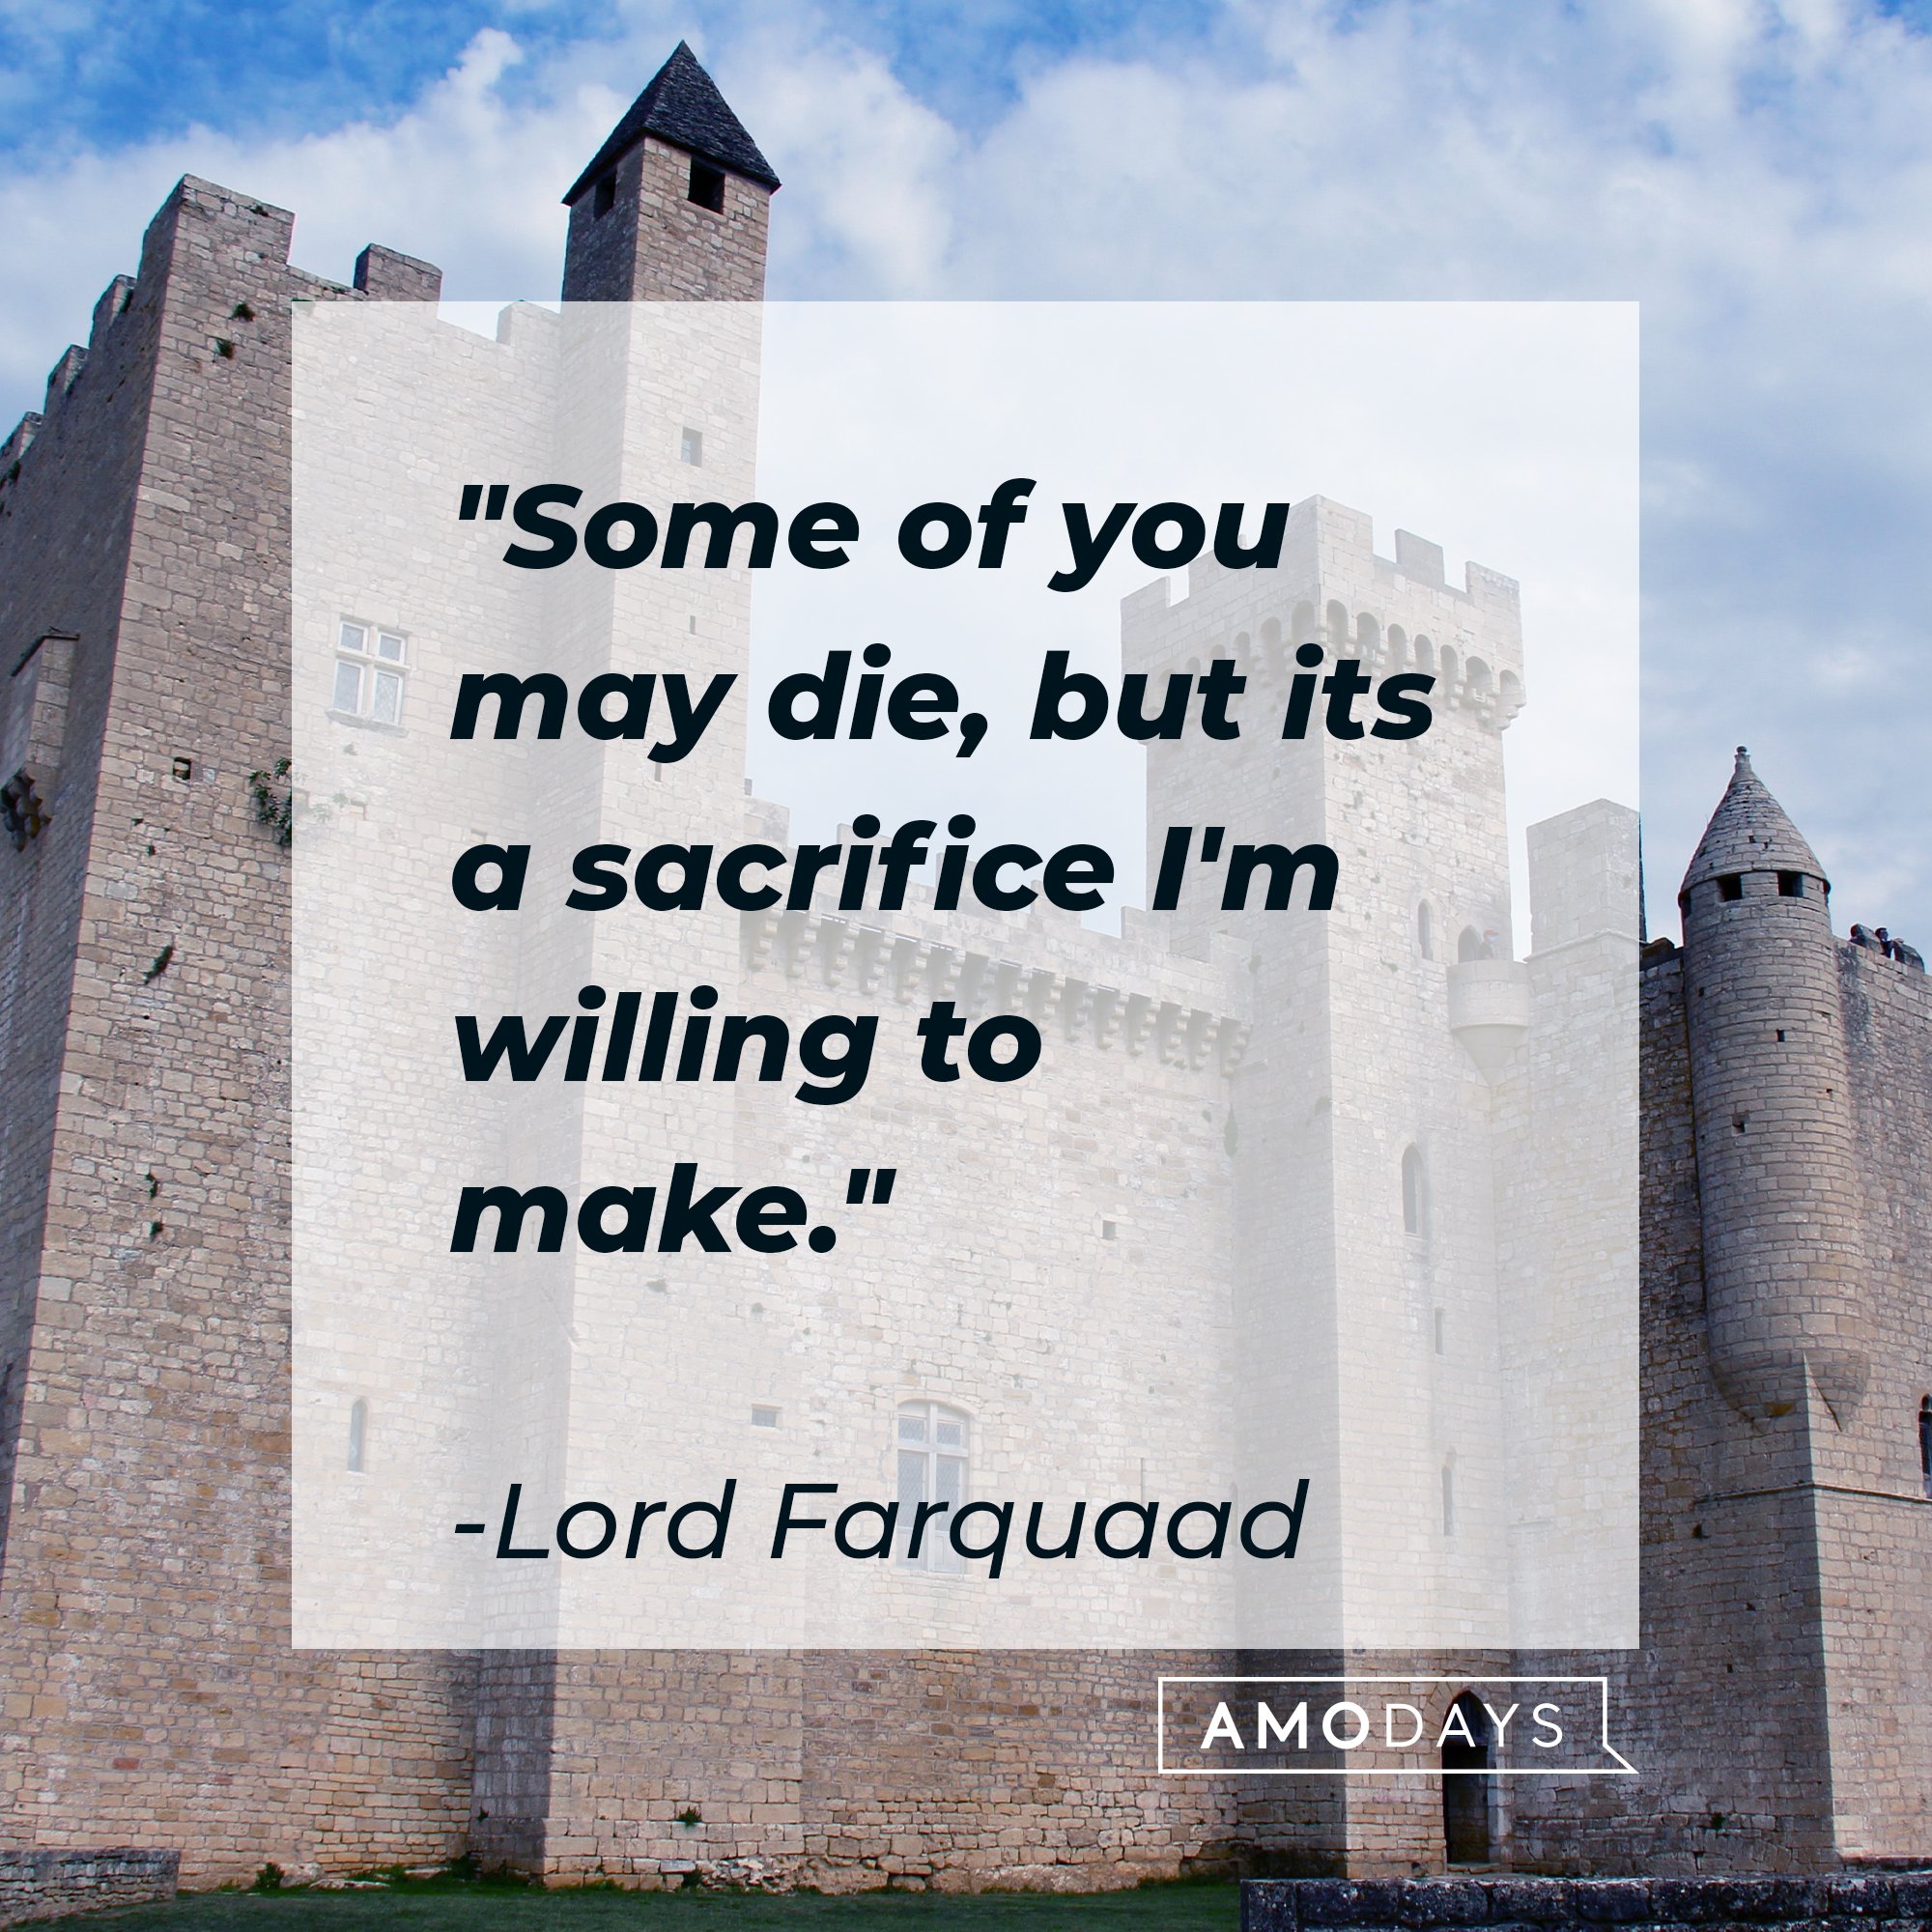 Lord Farquaad's quote: "Some of you may die, but its a sacrifice I'm willing to make." | Image: AmoDays